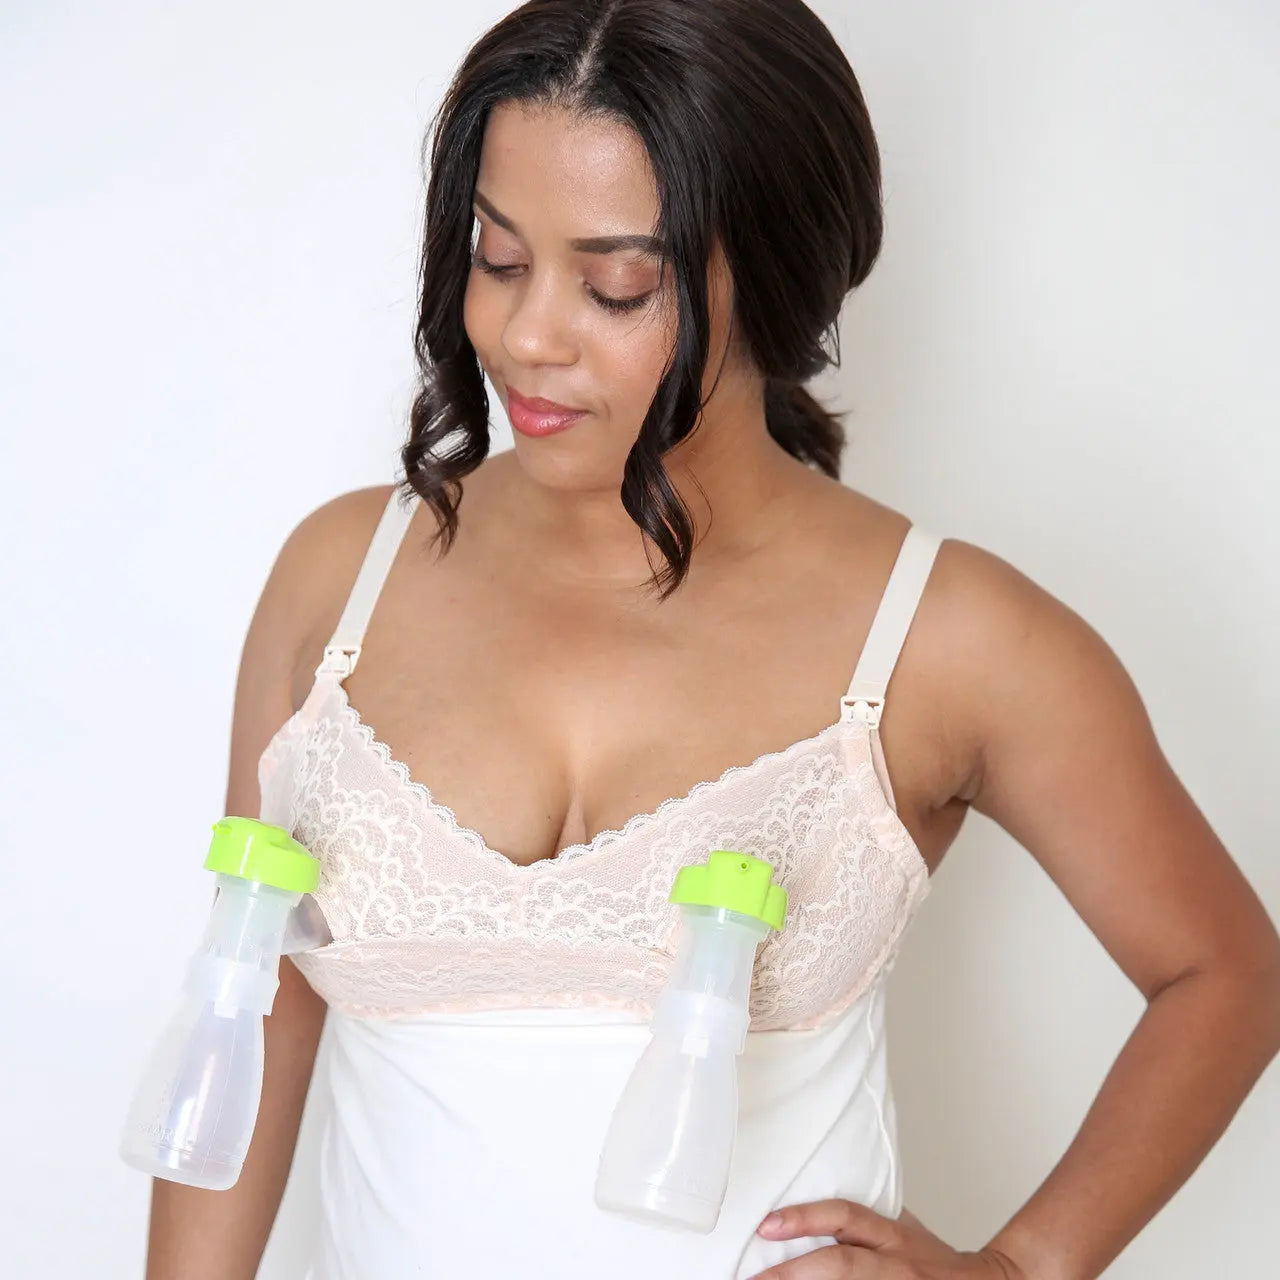 Leila nursing pumping tank cream image from the front, woman pumping